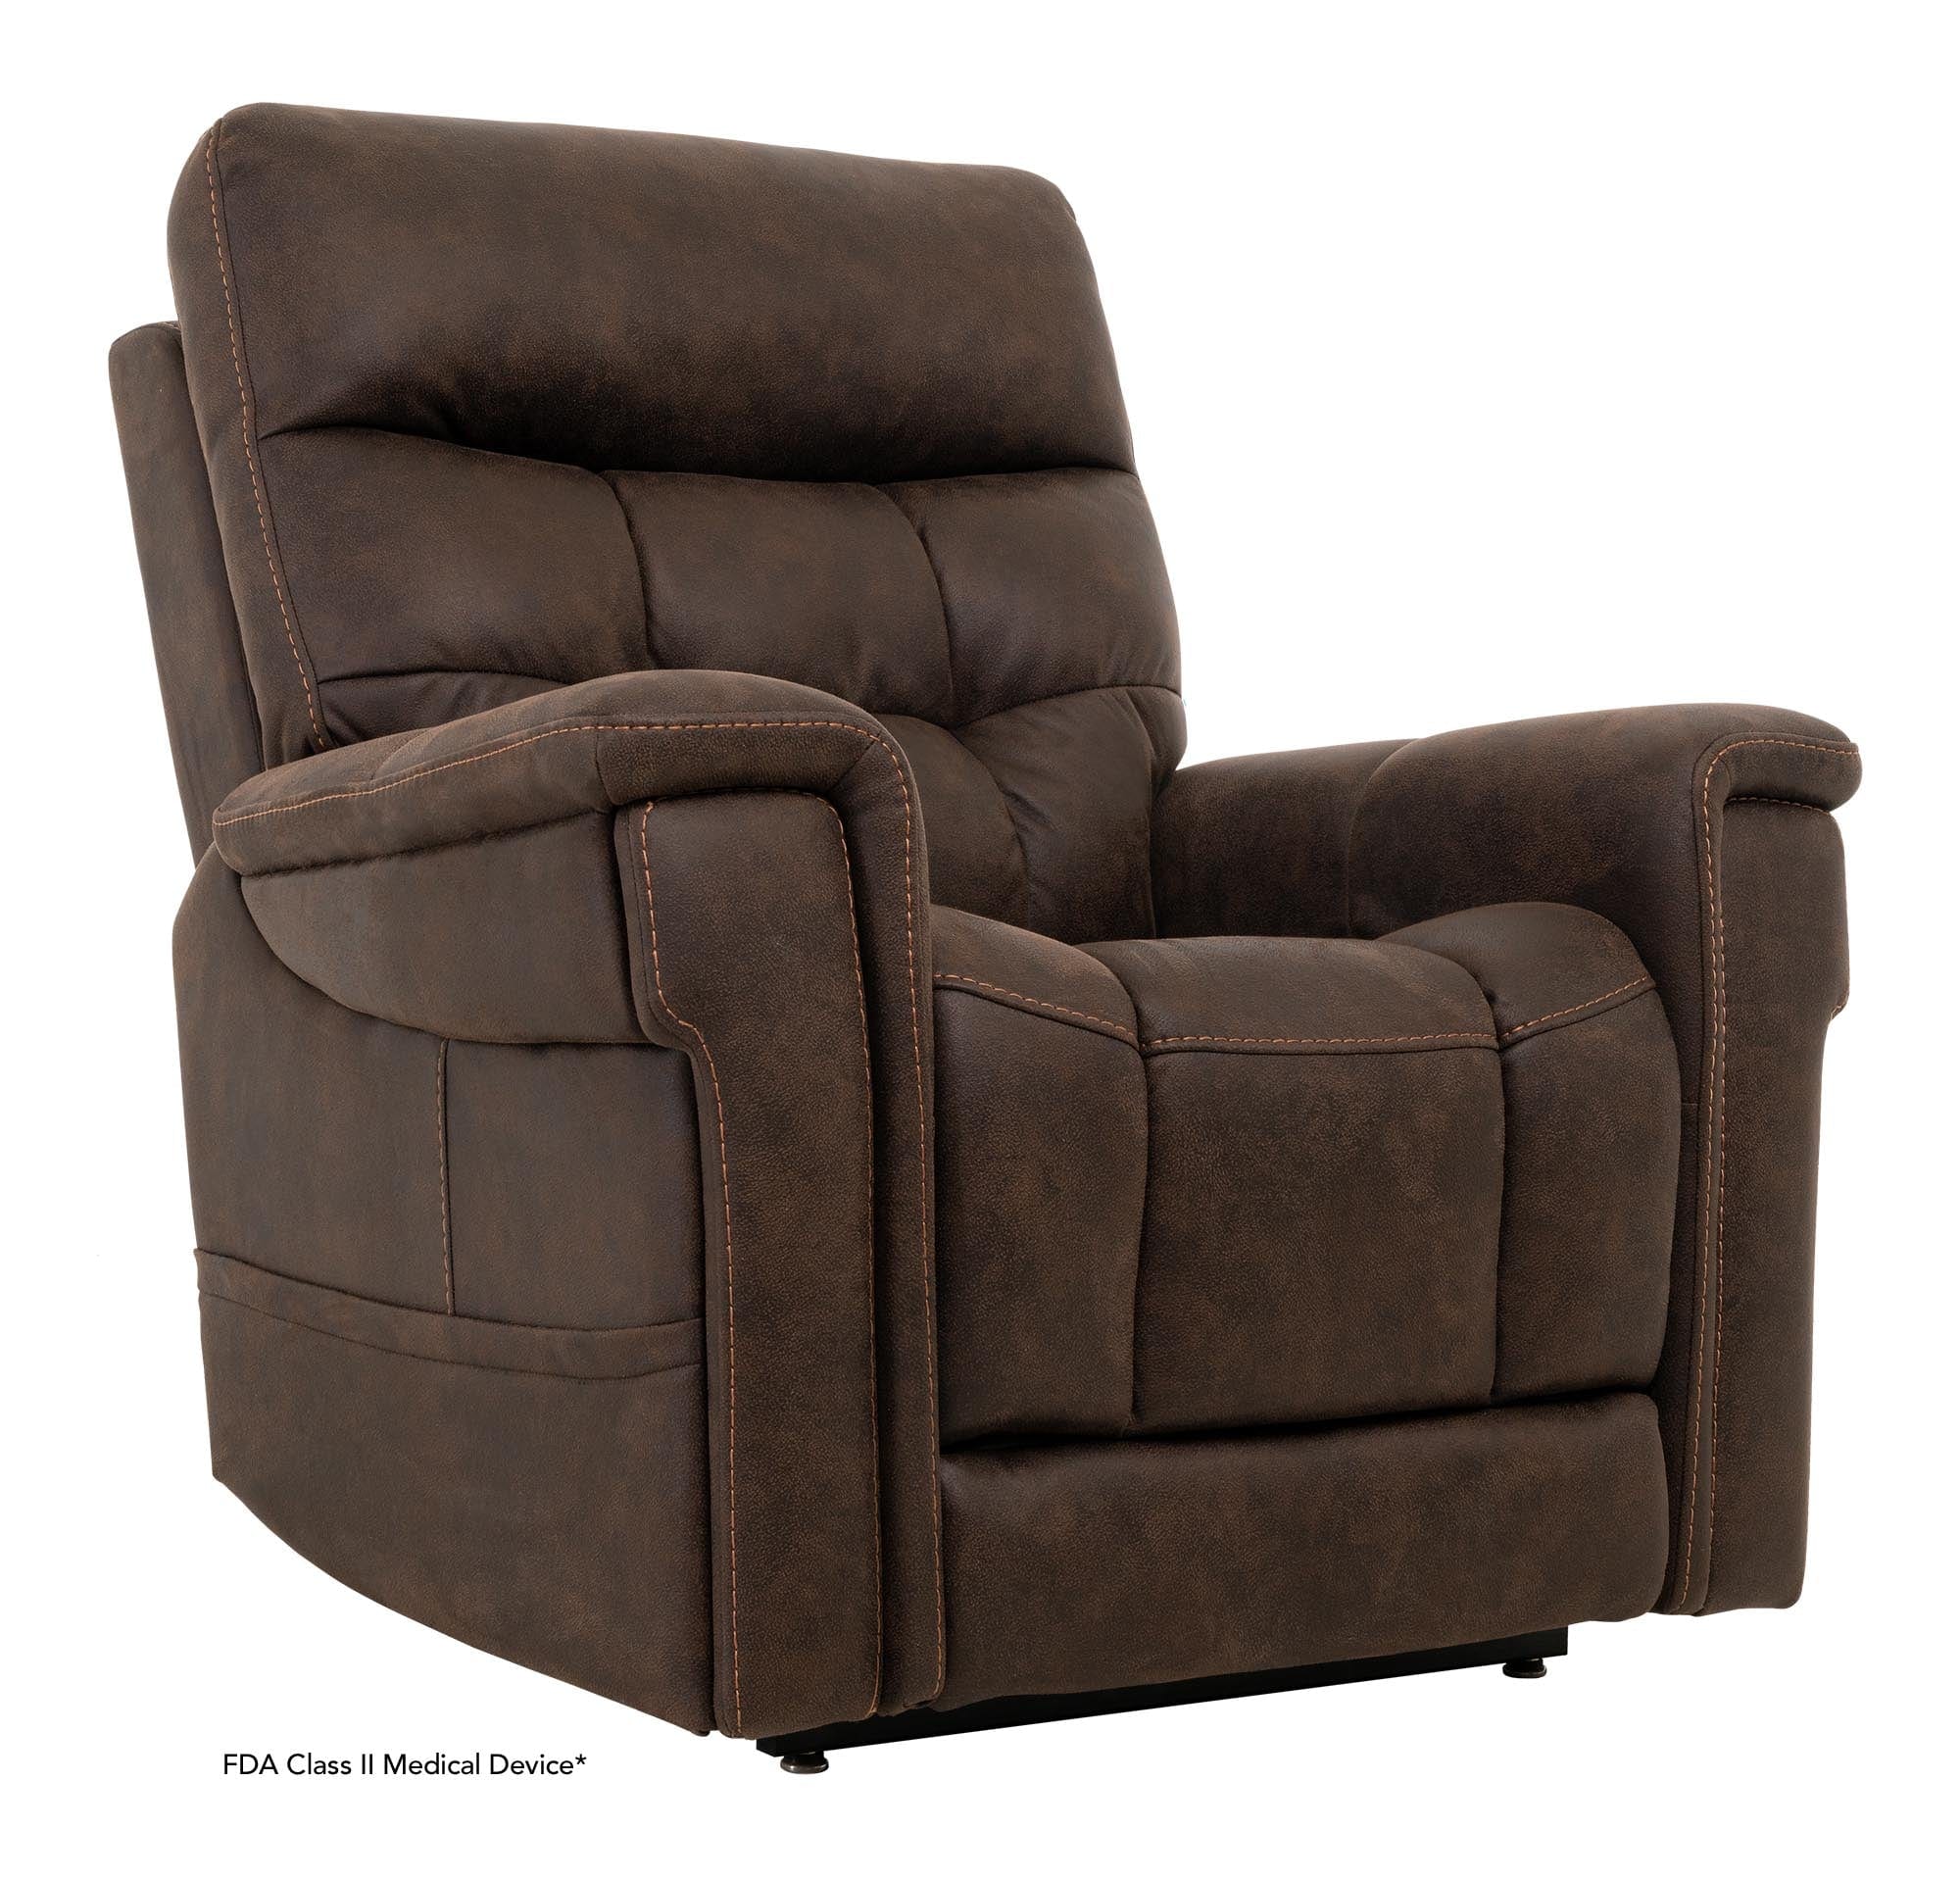 PRIDE Infinite Position Lift Chair Canyon Walnut / Small (4' - 5' 3") Pride Vivalift! Radiance Lift Recliner